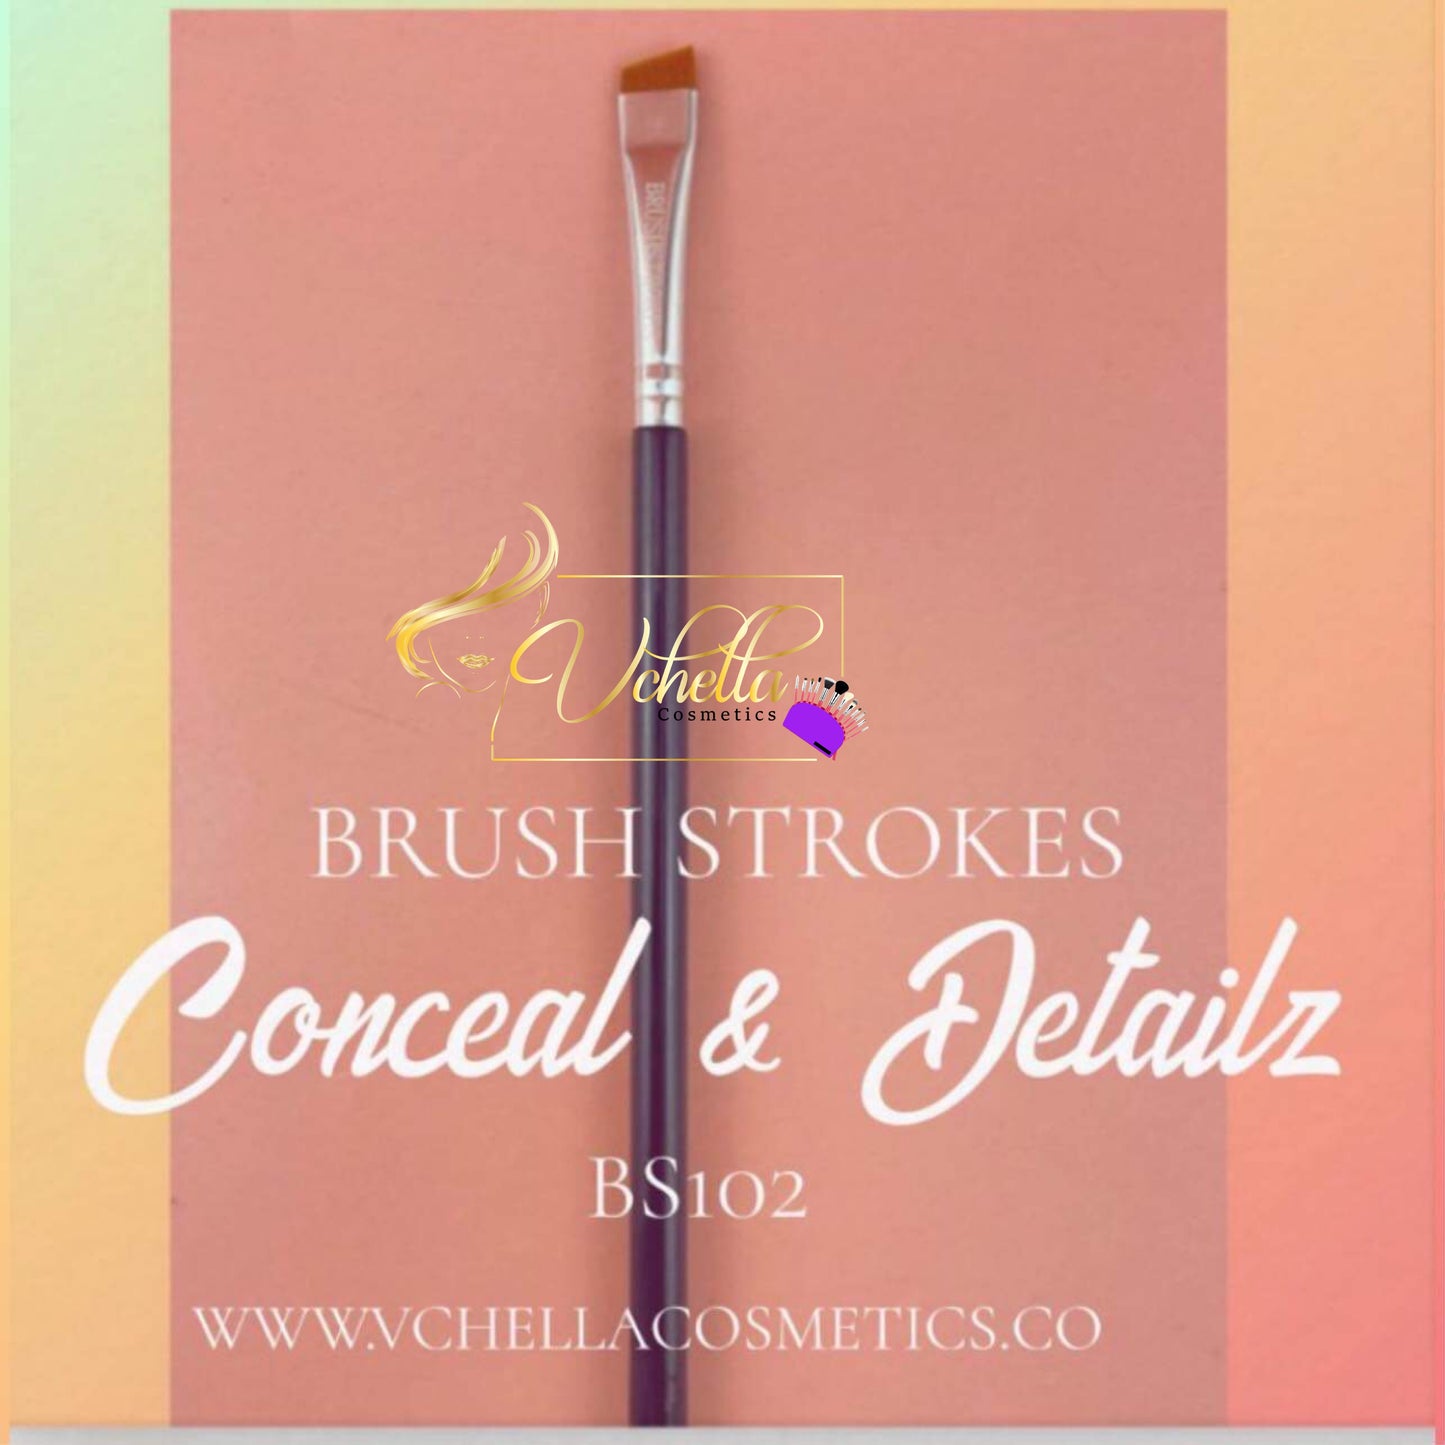 BRUSH STROKES CONCEAL & DETAILZ COLLABORATION